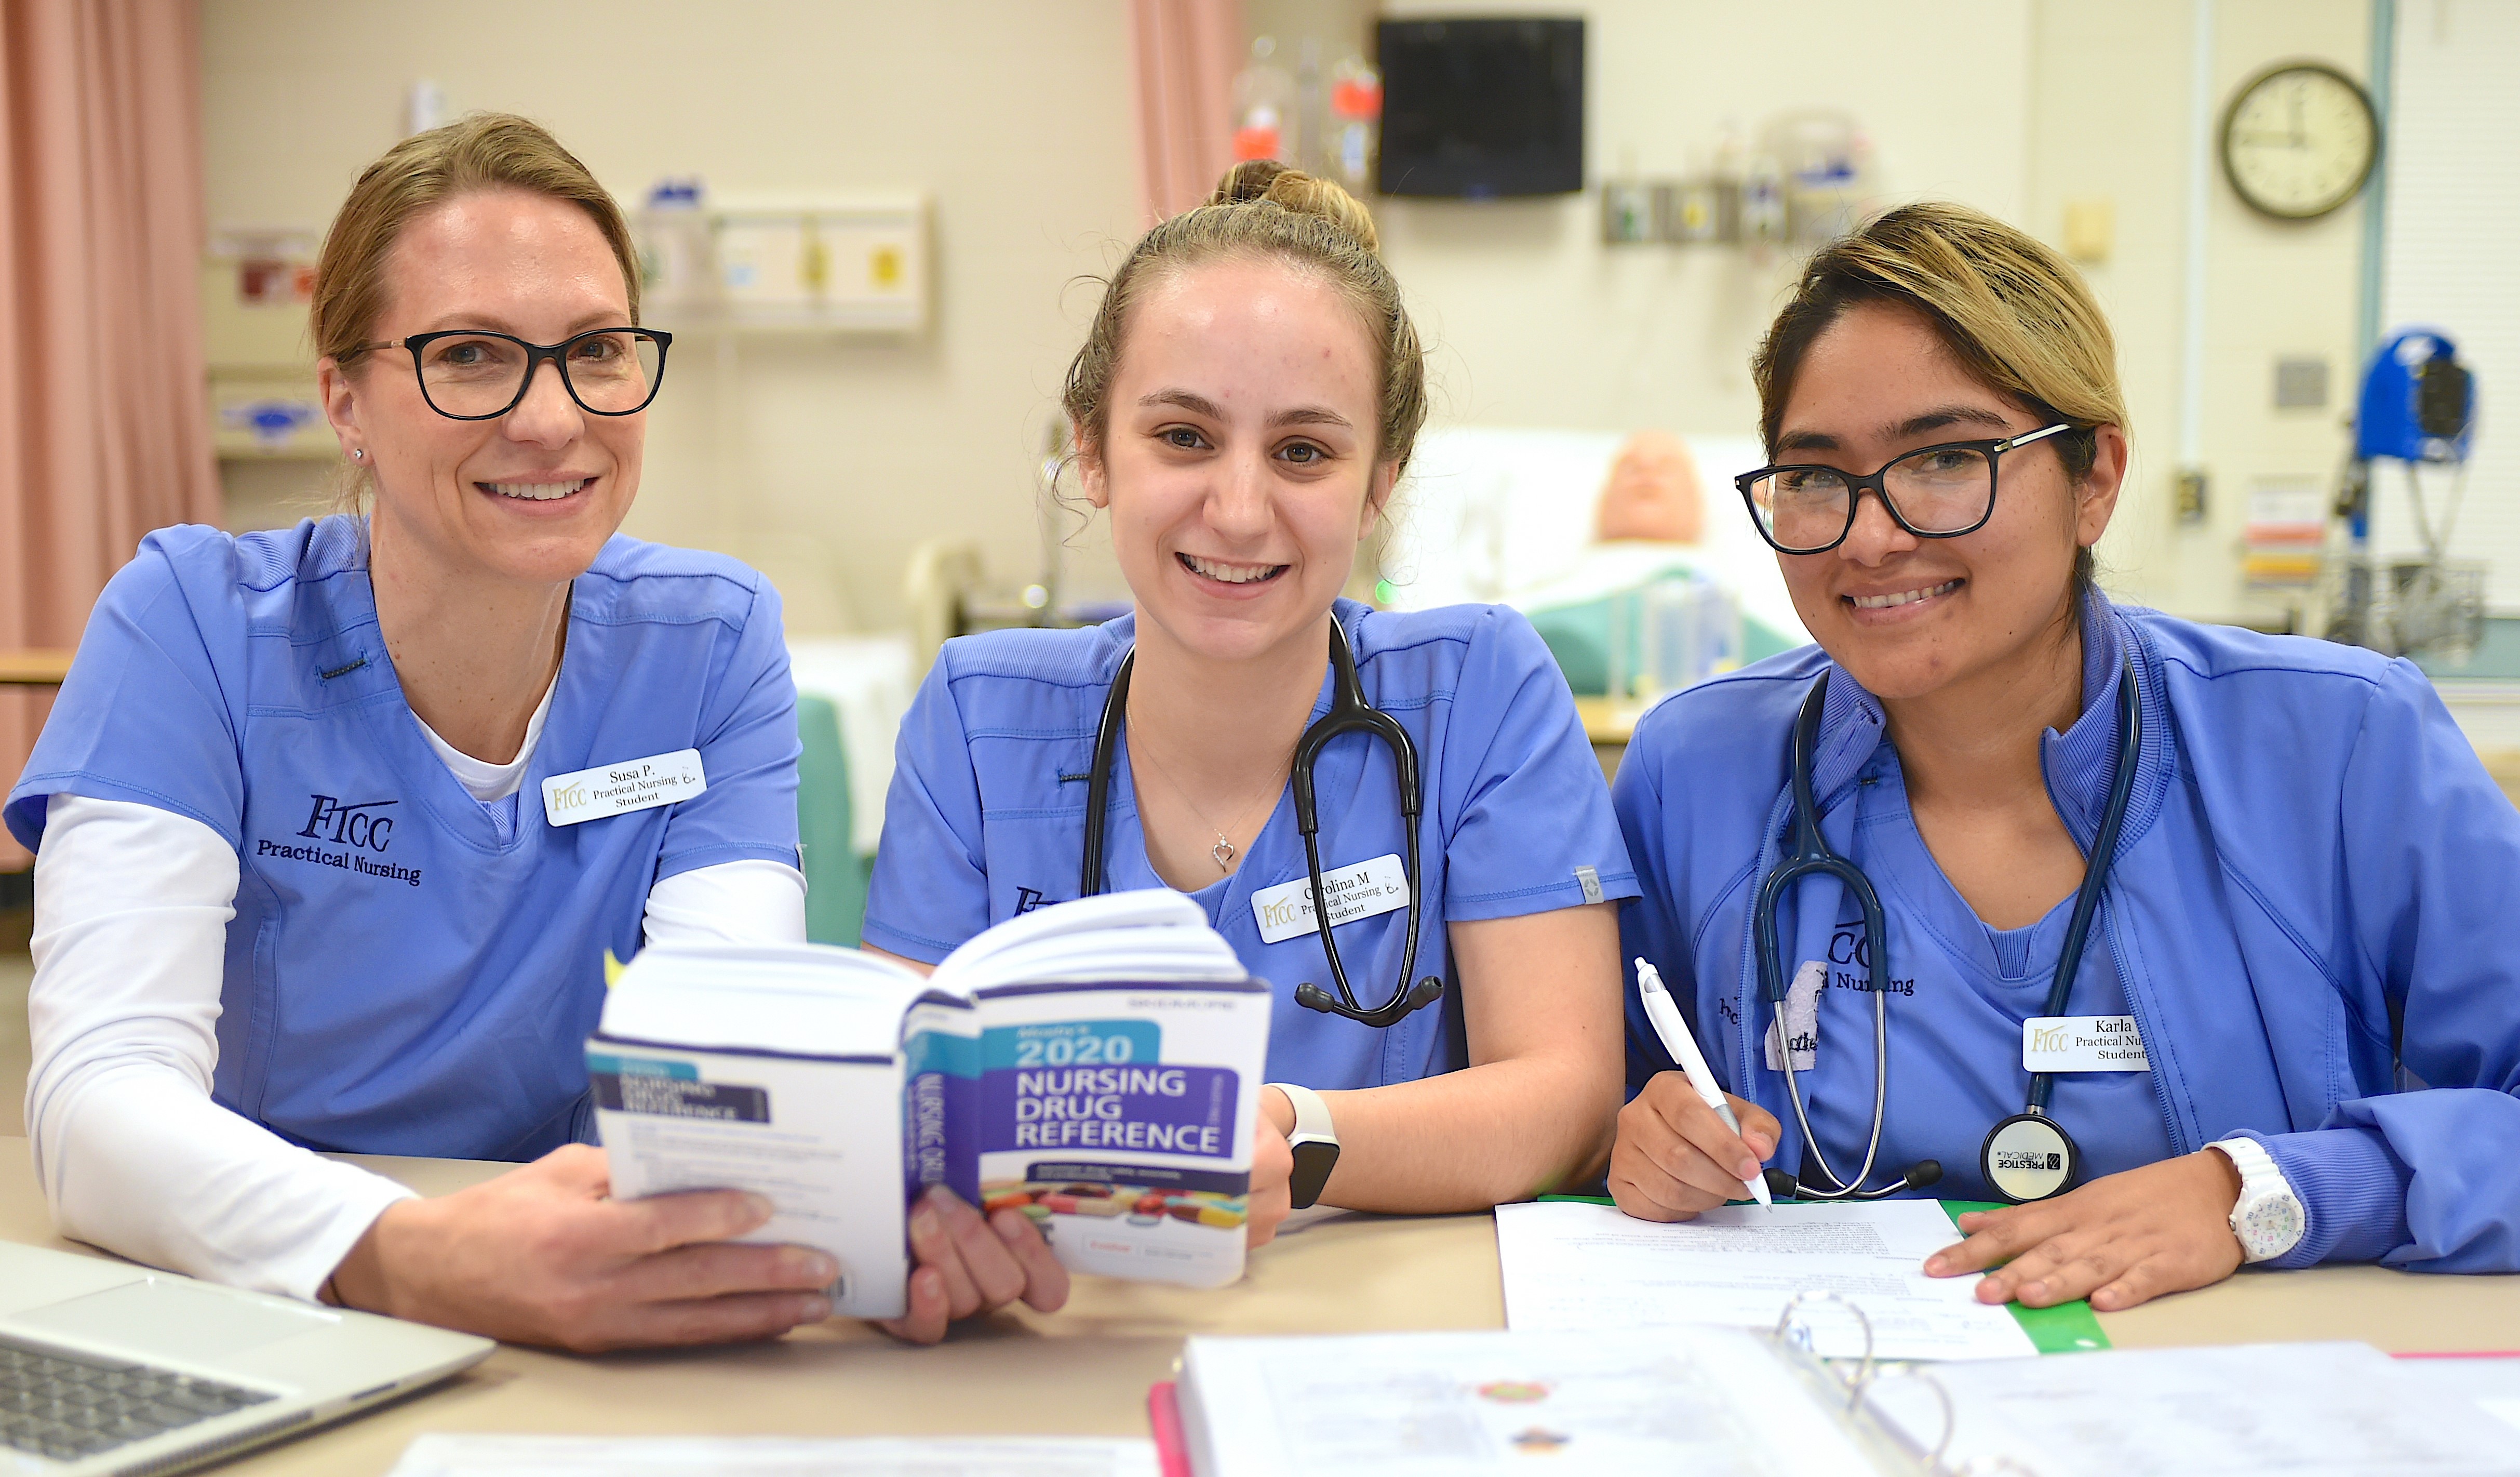 Three nursing students in blue scrubs studying together at a table with books and notes in a classroom or lab setting.